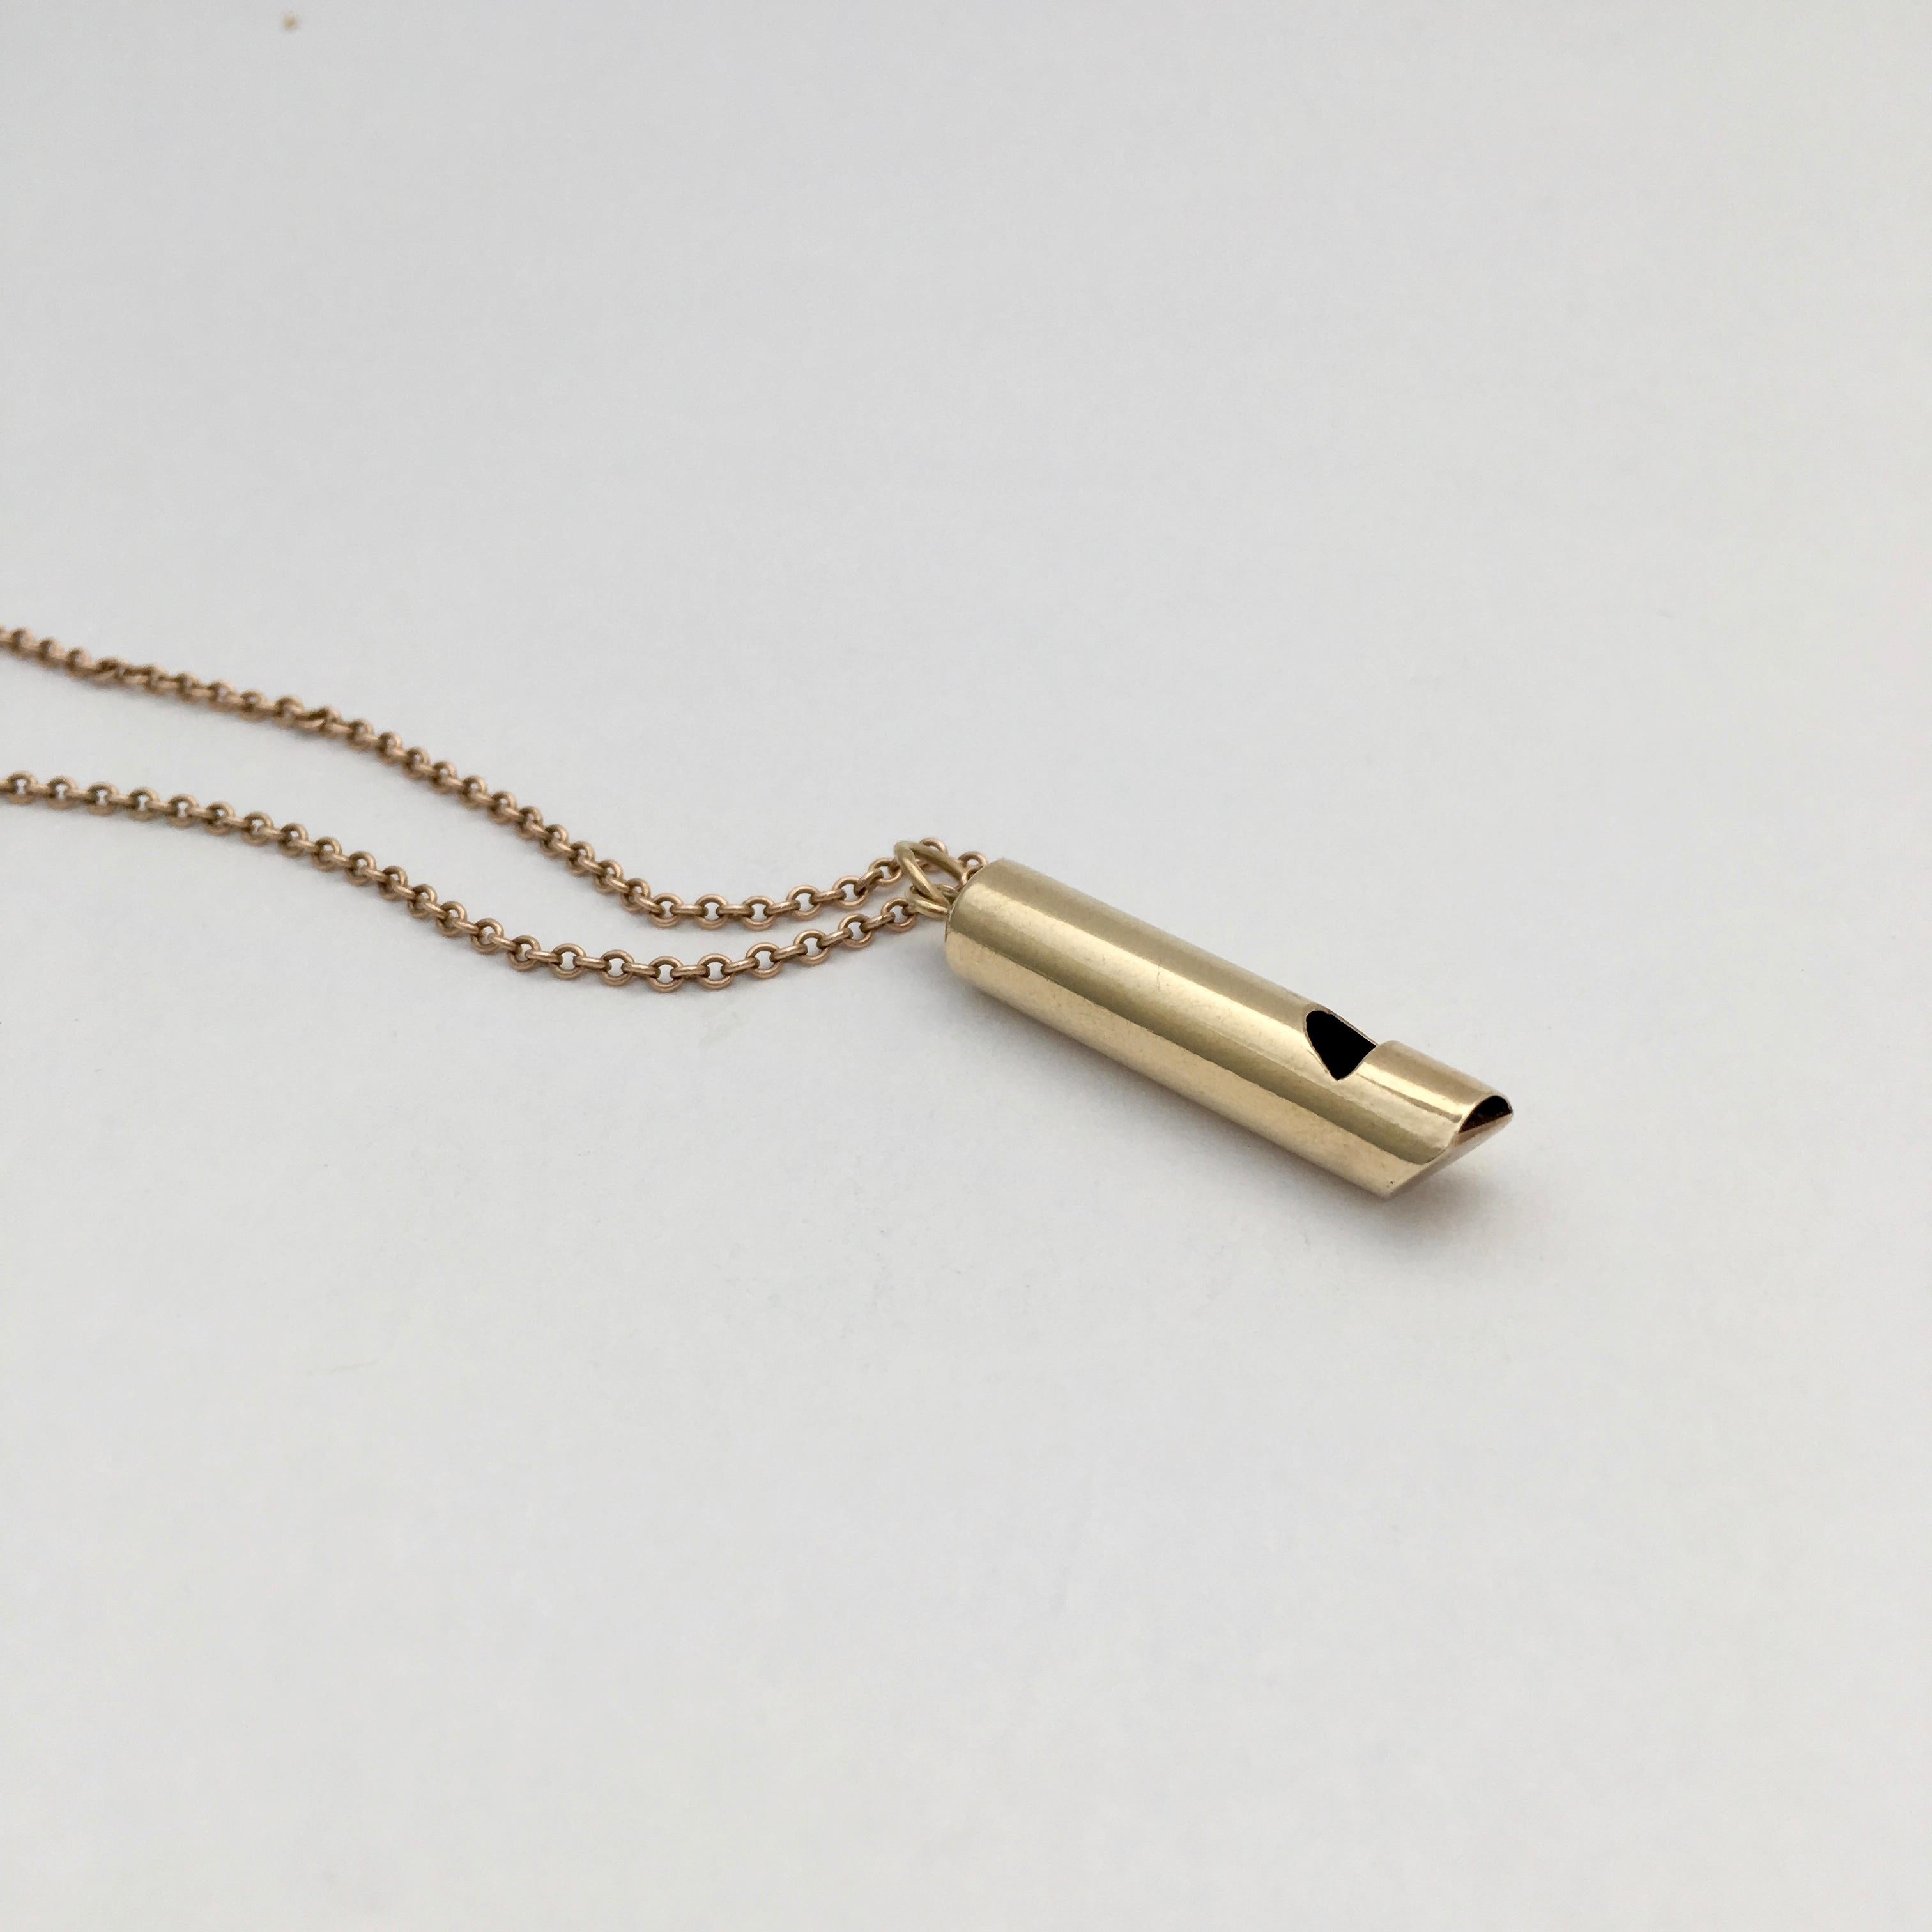 This vintage 9ct gold whistle charm was made in London in 1976. It is in full working order and produces a good sharp whistle. The whistle is 3.6cm long (not including bale and link) and perfectly proportioned to make a stylishly quirky pendant.